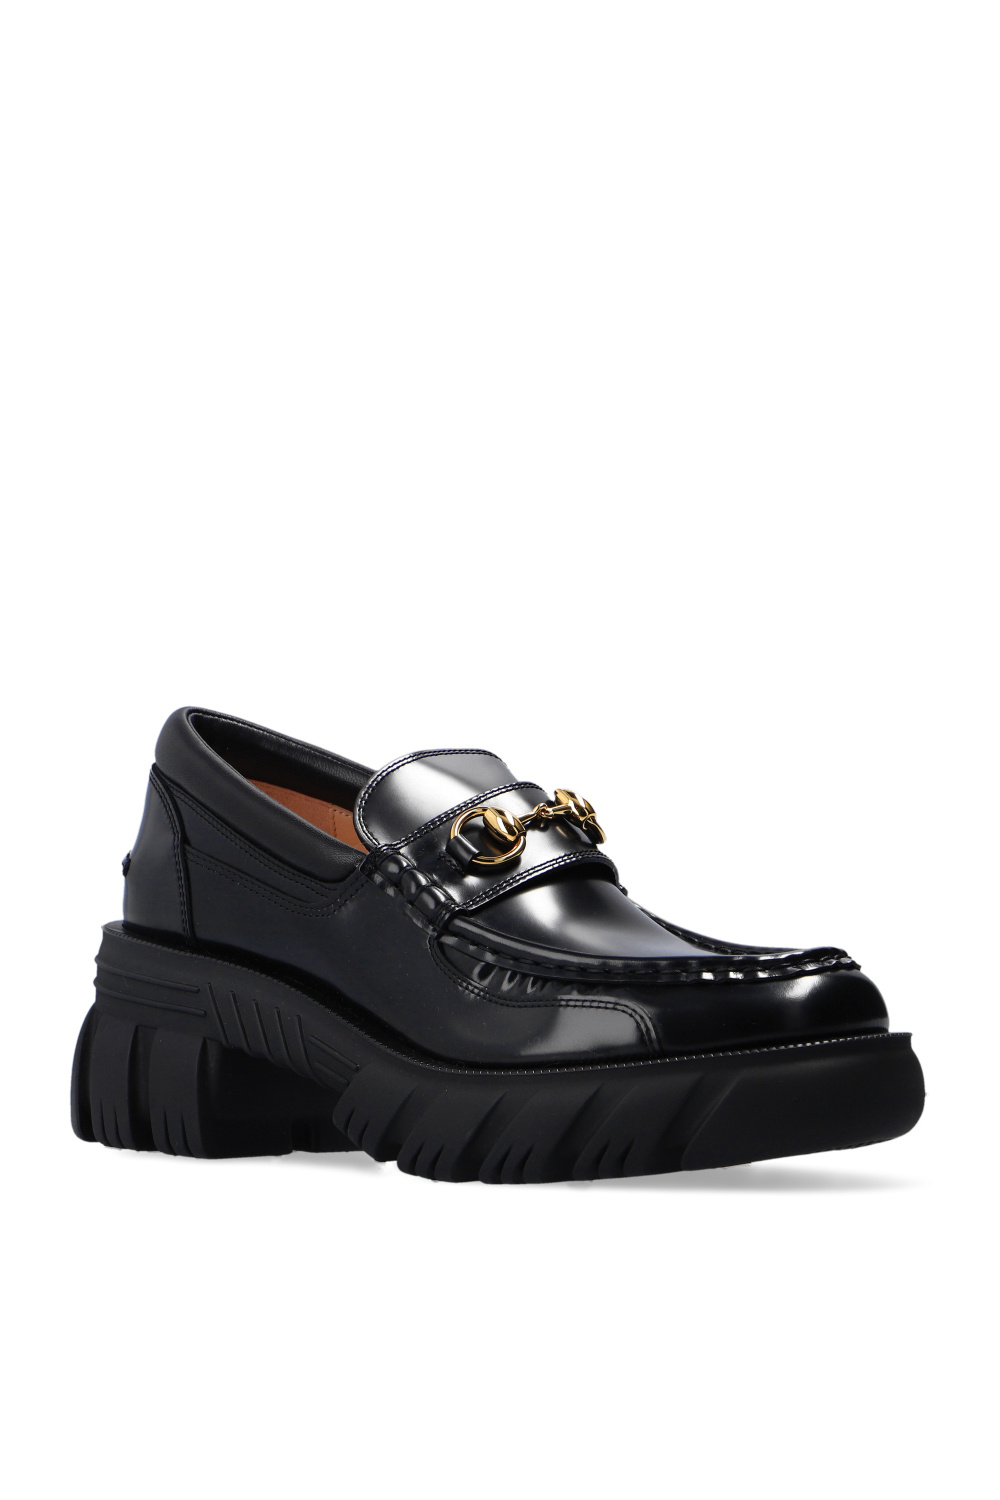 gucci szk Leather loafers